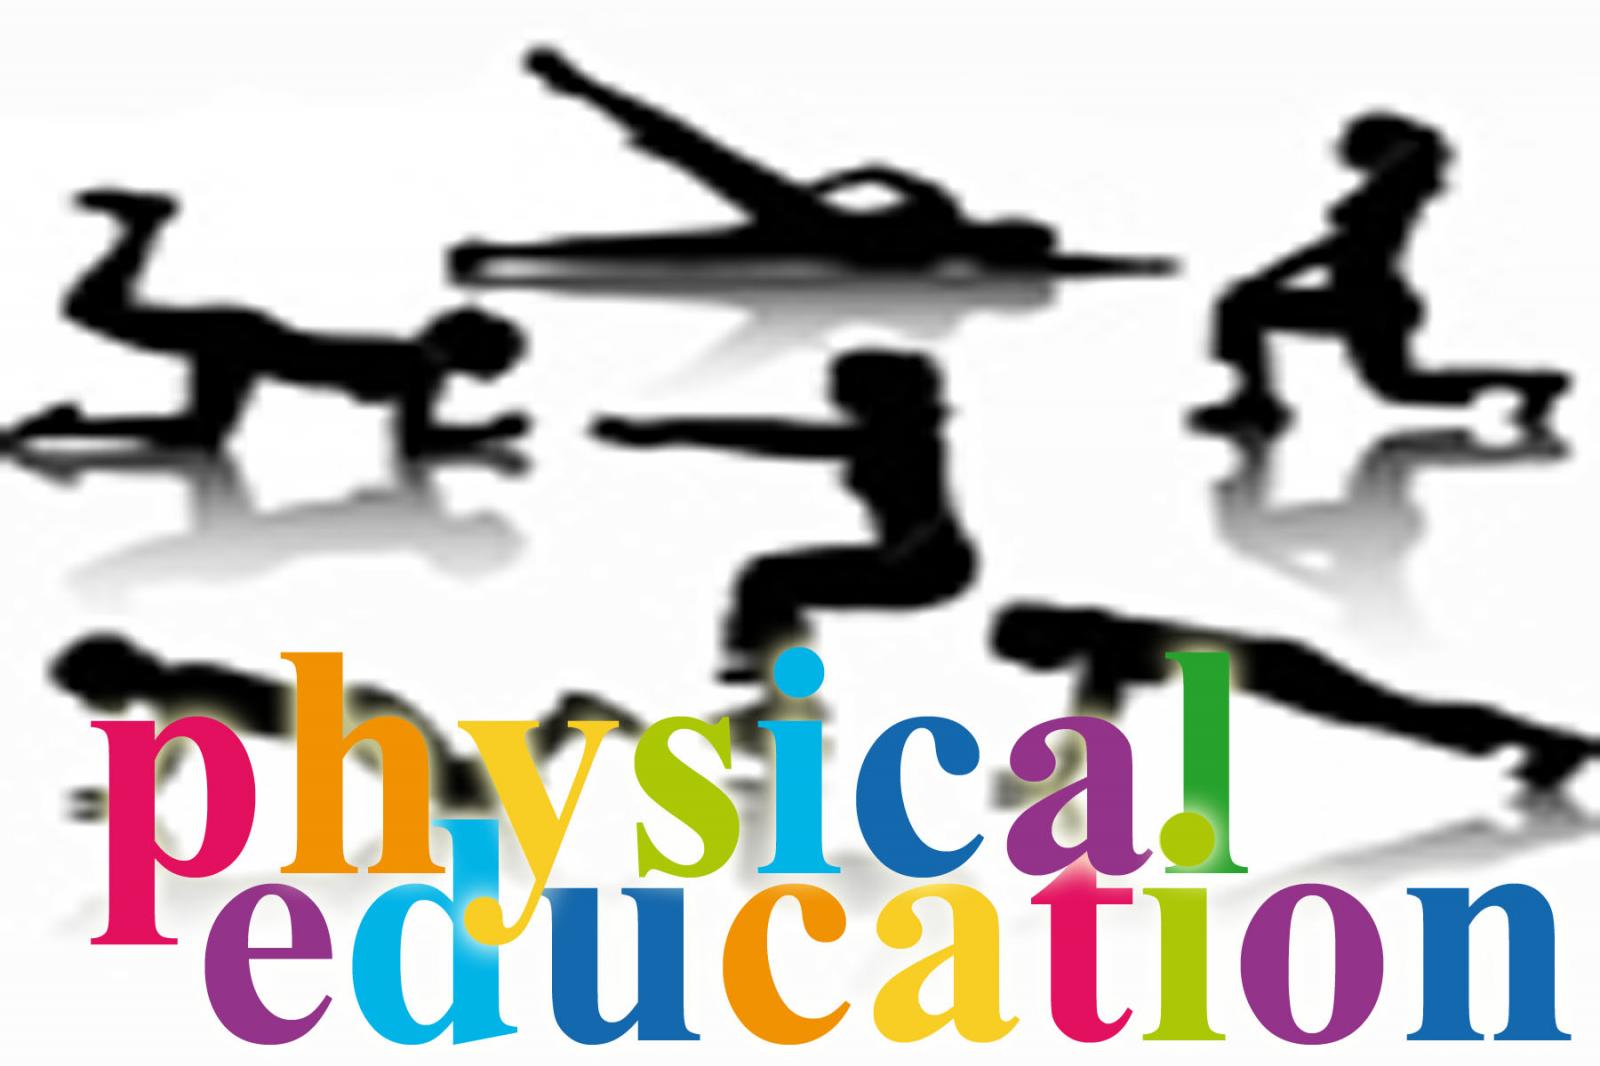 phy ed clip art special